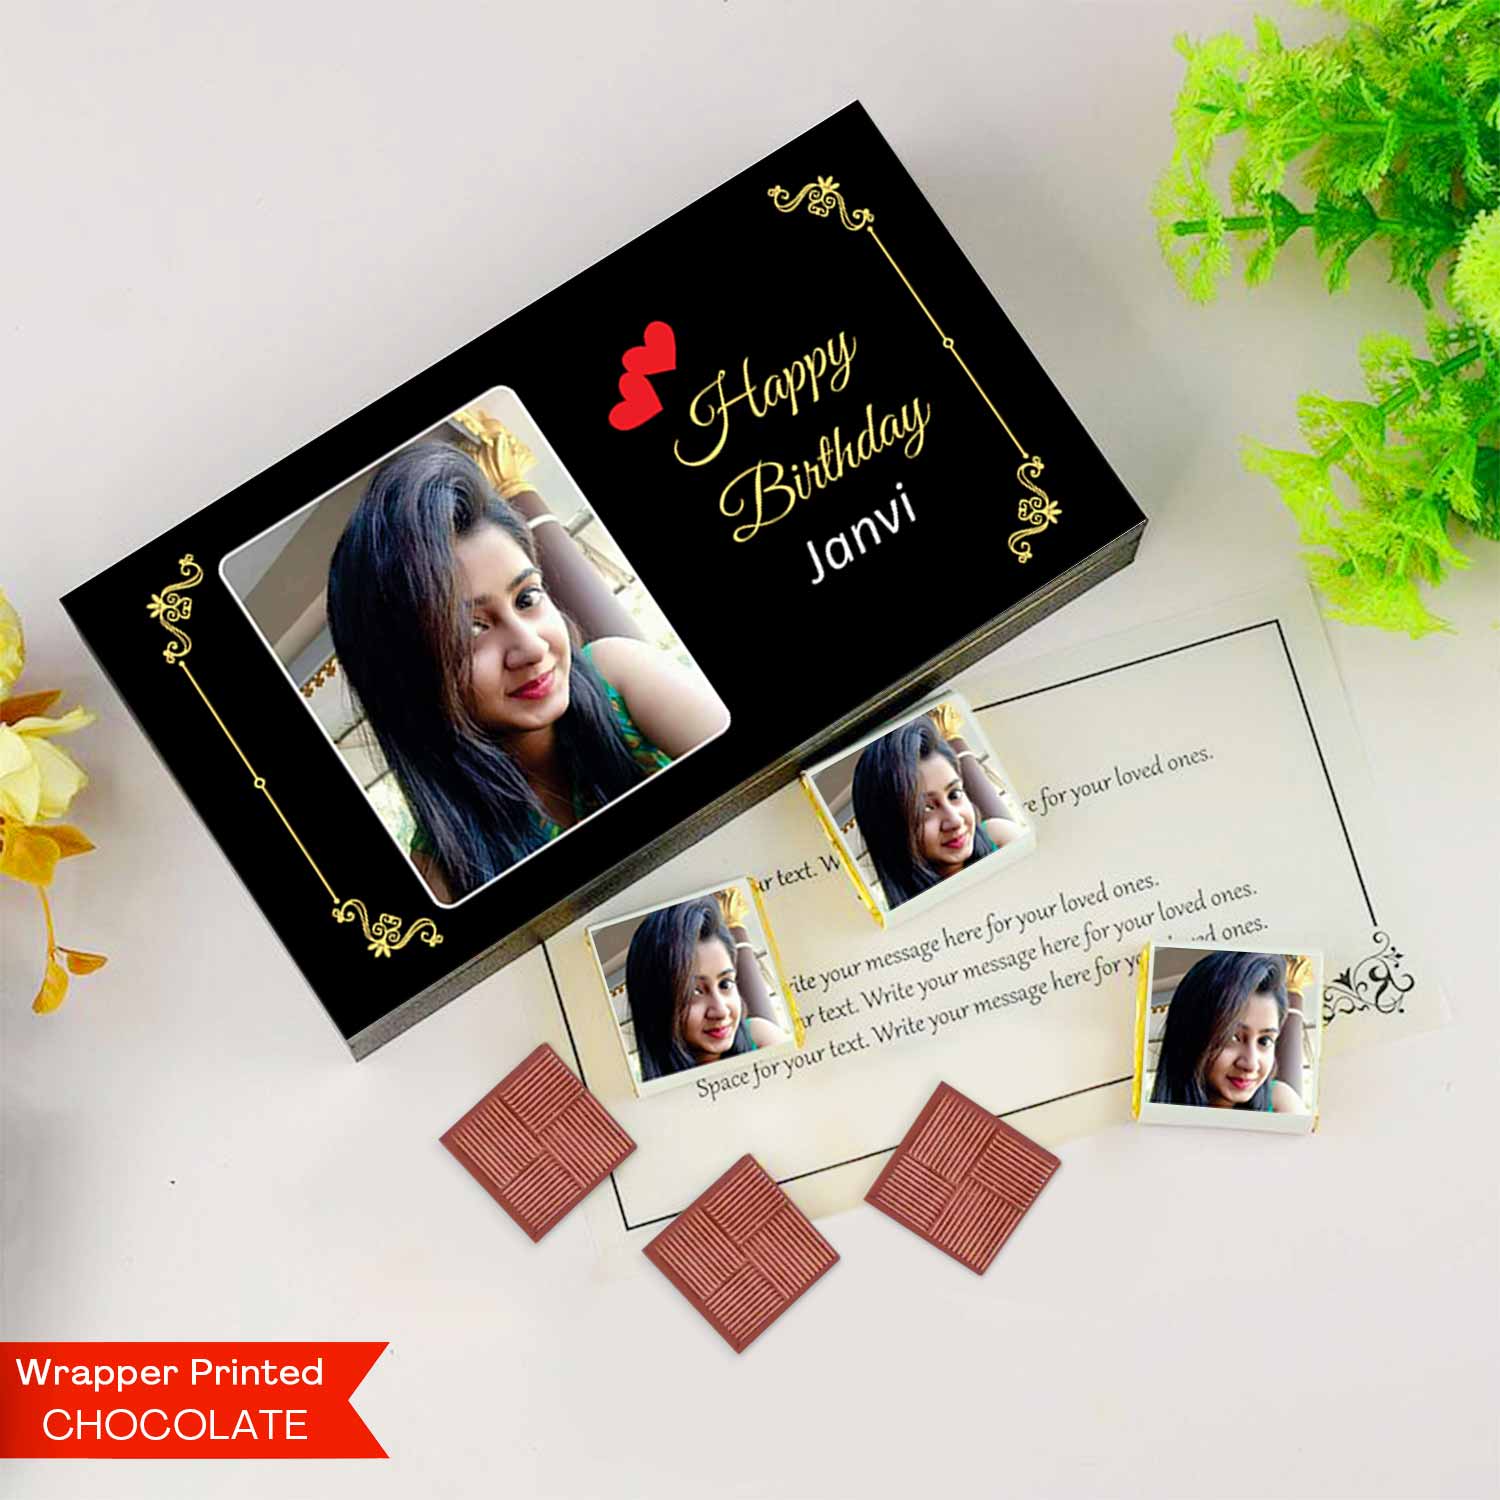 design your own chocolate bar wrapper online personalised chocolate wrappers near me personalised chocolate corporate gifts personalized chocolate wrapping paper custom printed chocolate personalised chocolates with names personalized chocolate gifts printed chocolate boxes